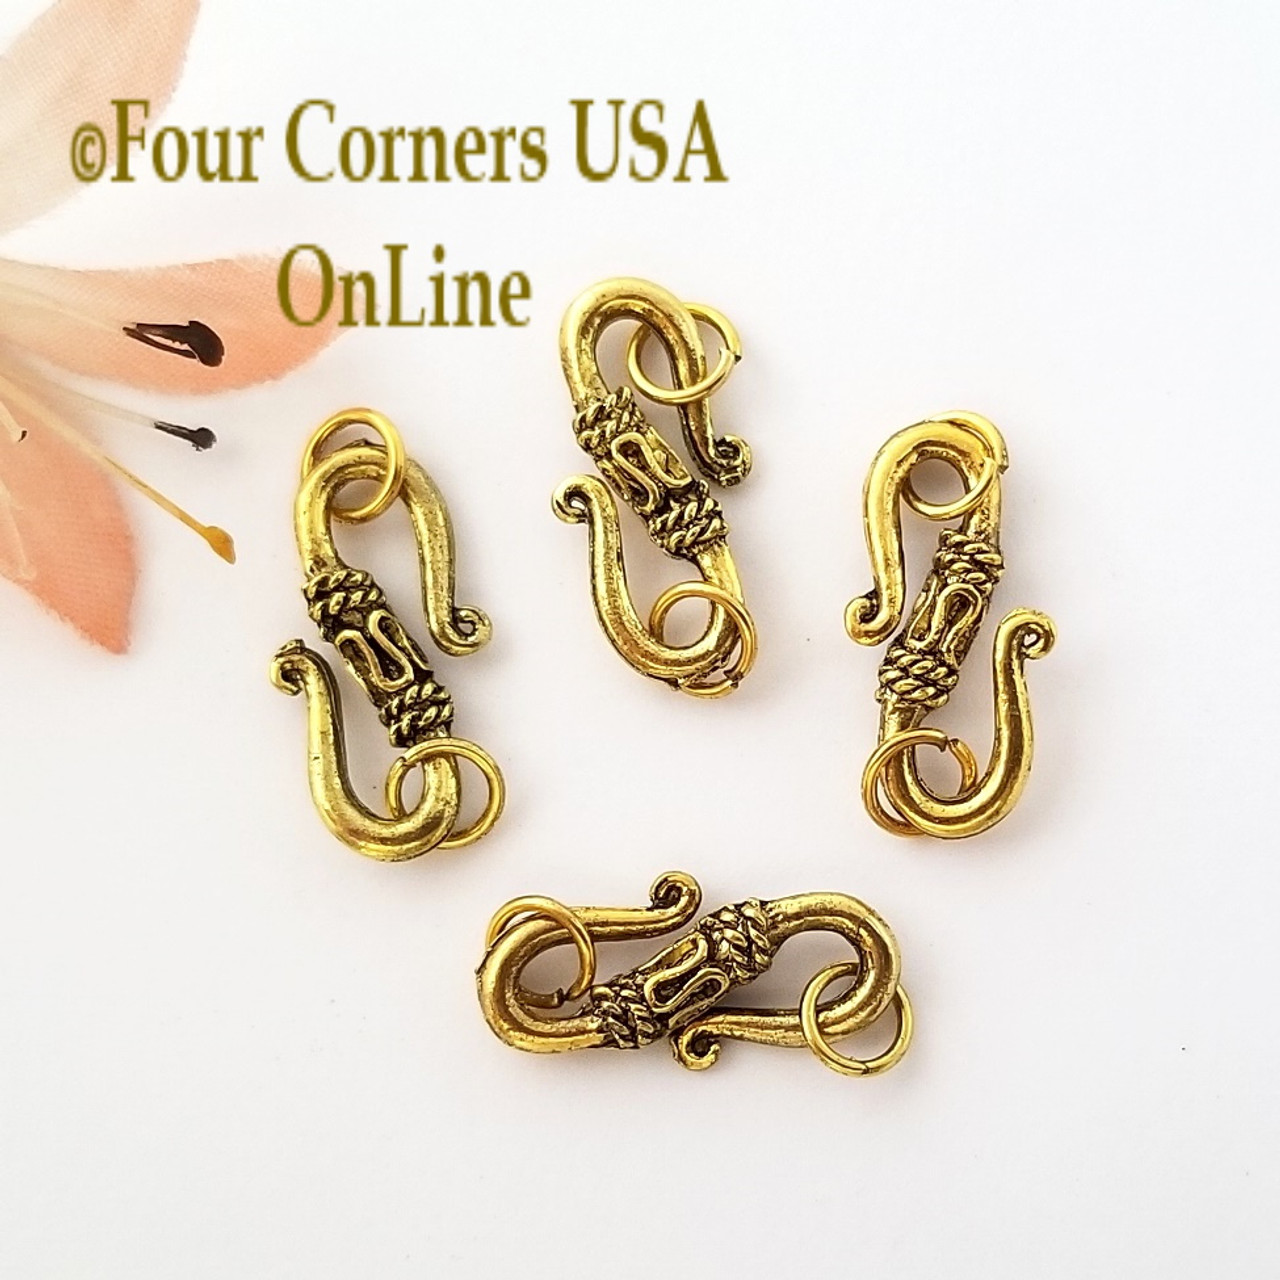 Gold Plated 22mm S Hook Clasp 20 Pieces Special Buy Final Sale BDZ-2056 -  Four Corners USA Online